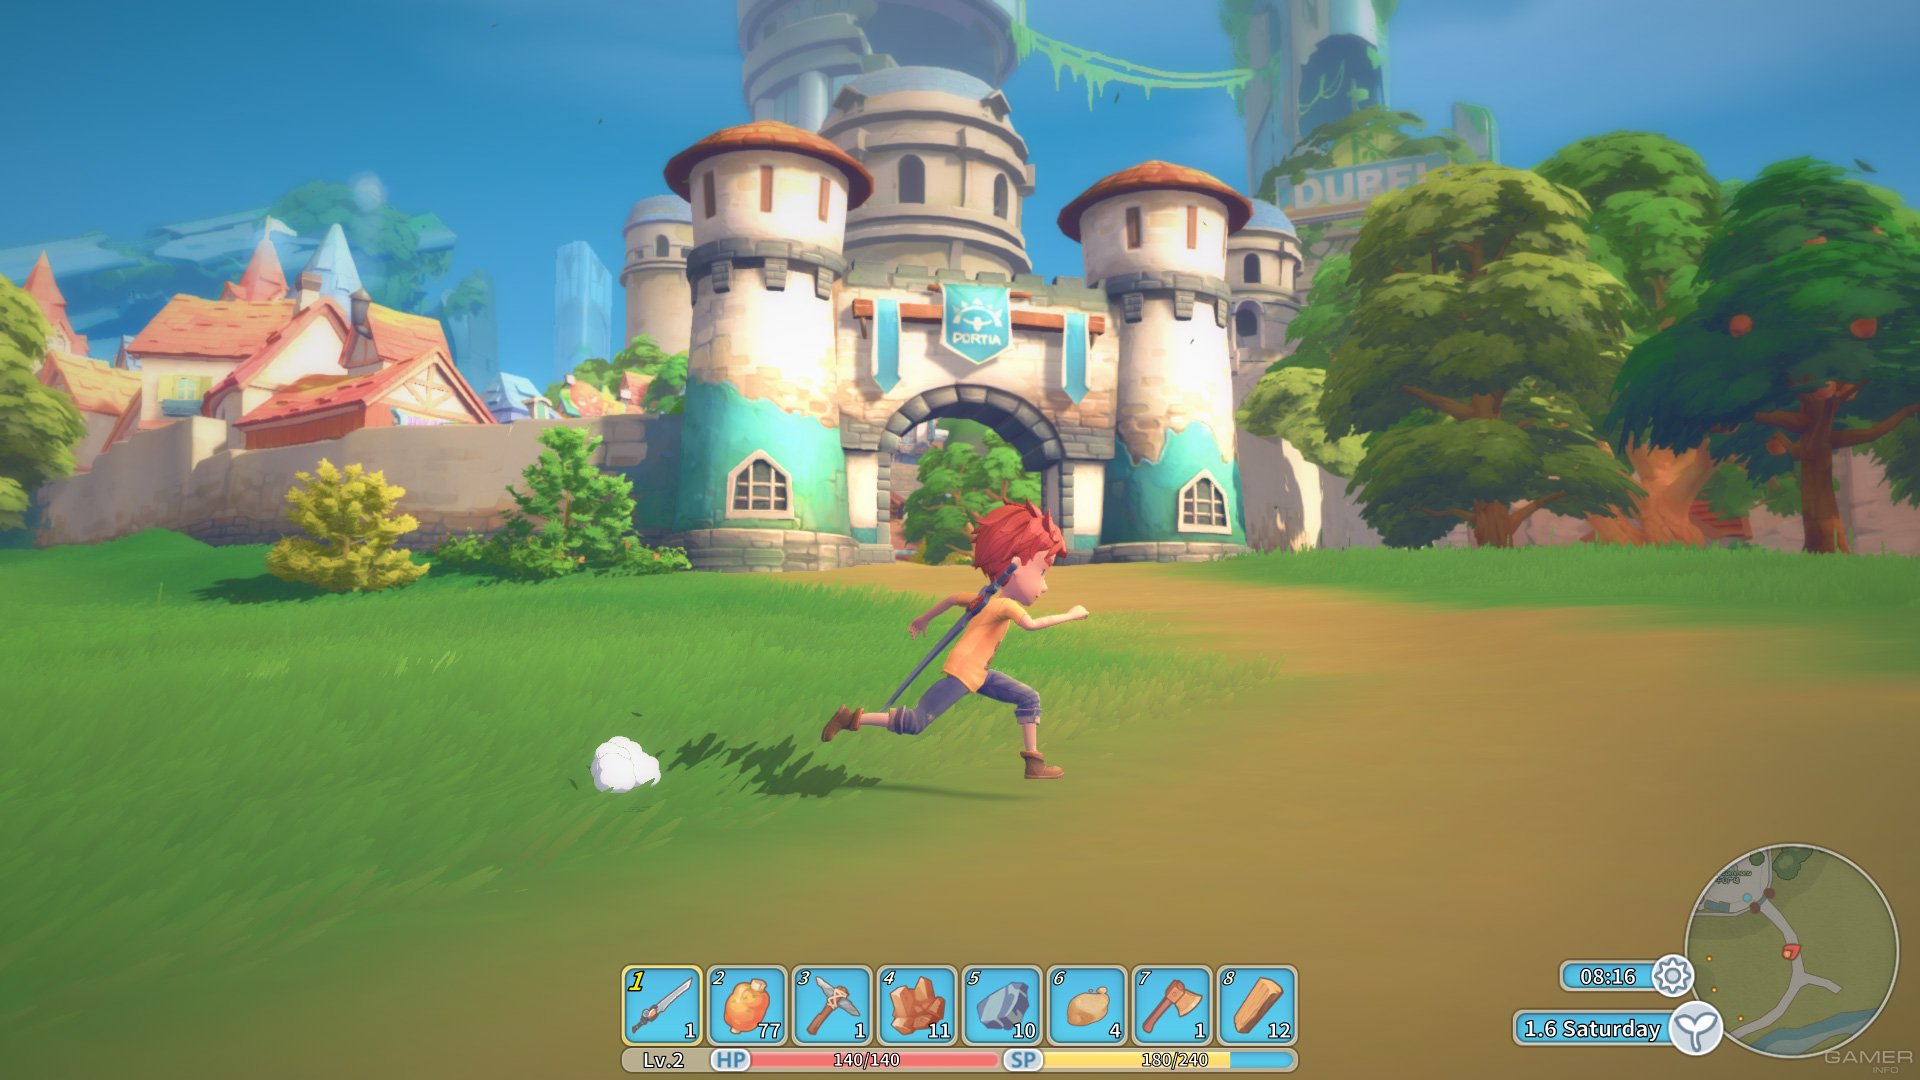 My Time At Portia - скриншоты.